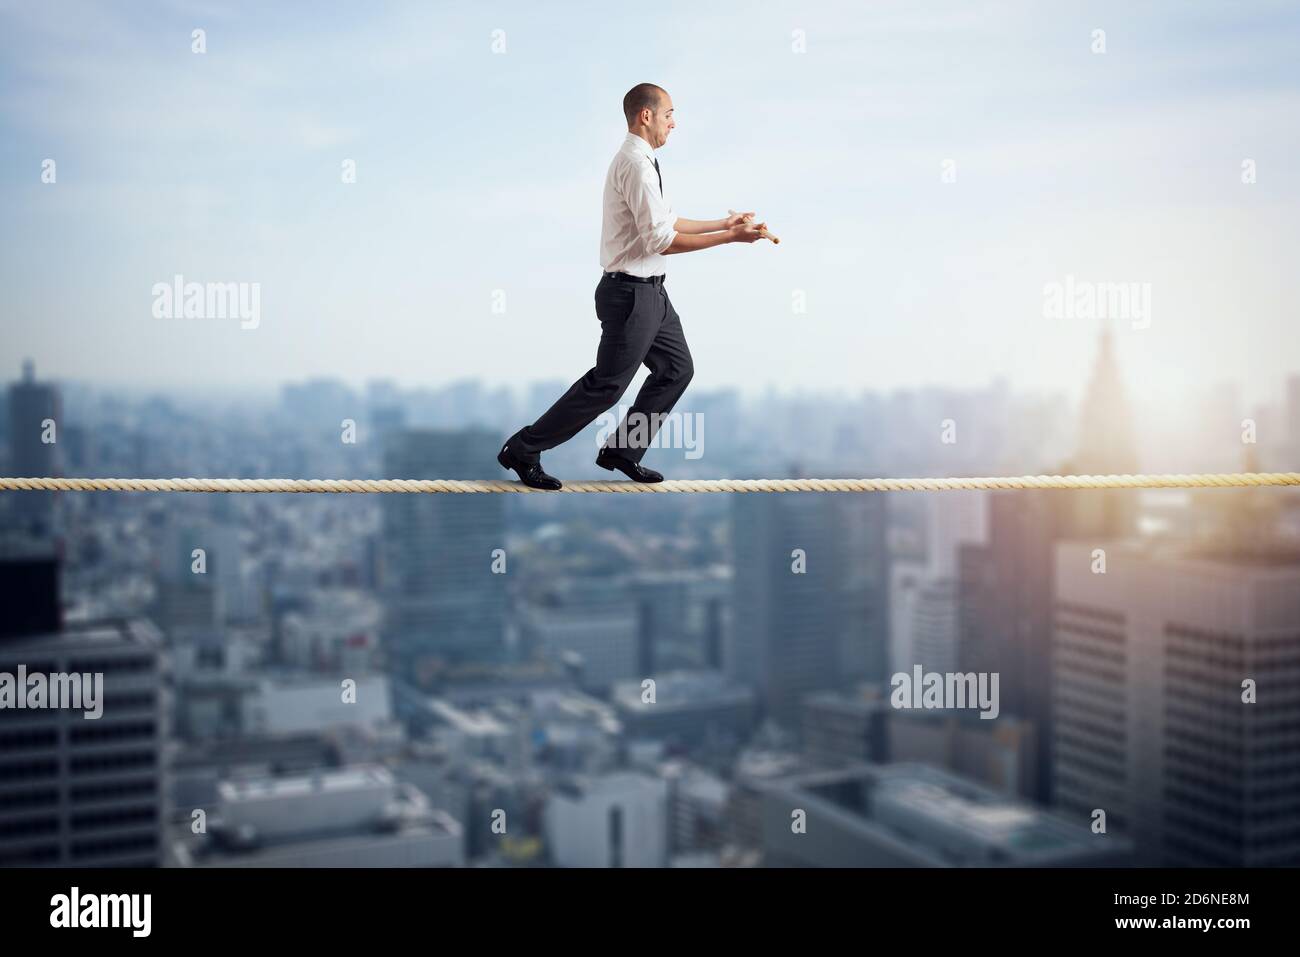 Worry man in balance walking on a rope over a city Stock Photo